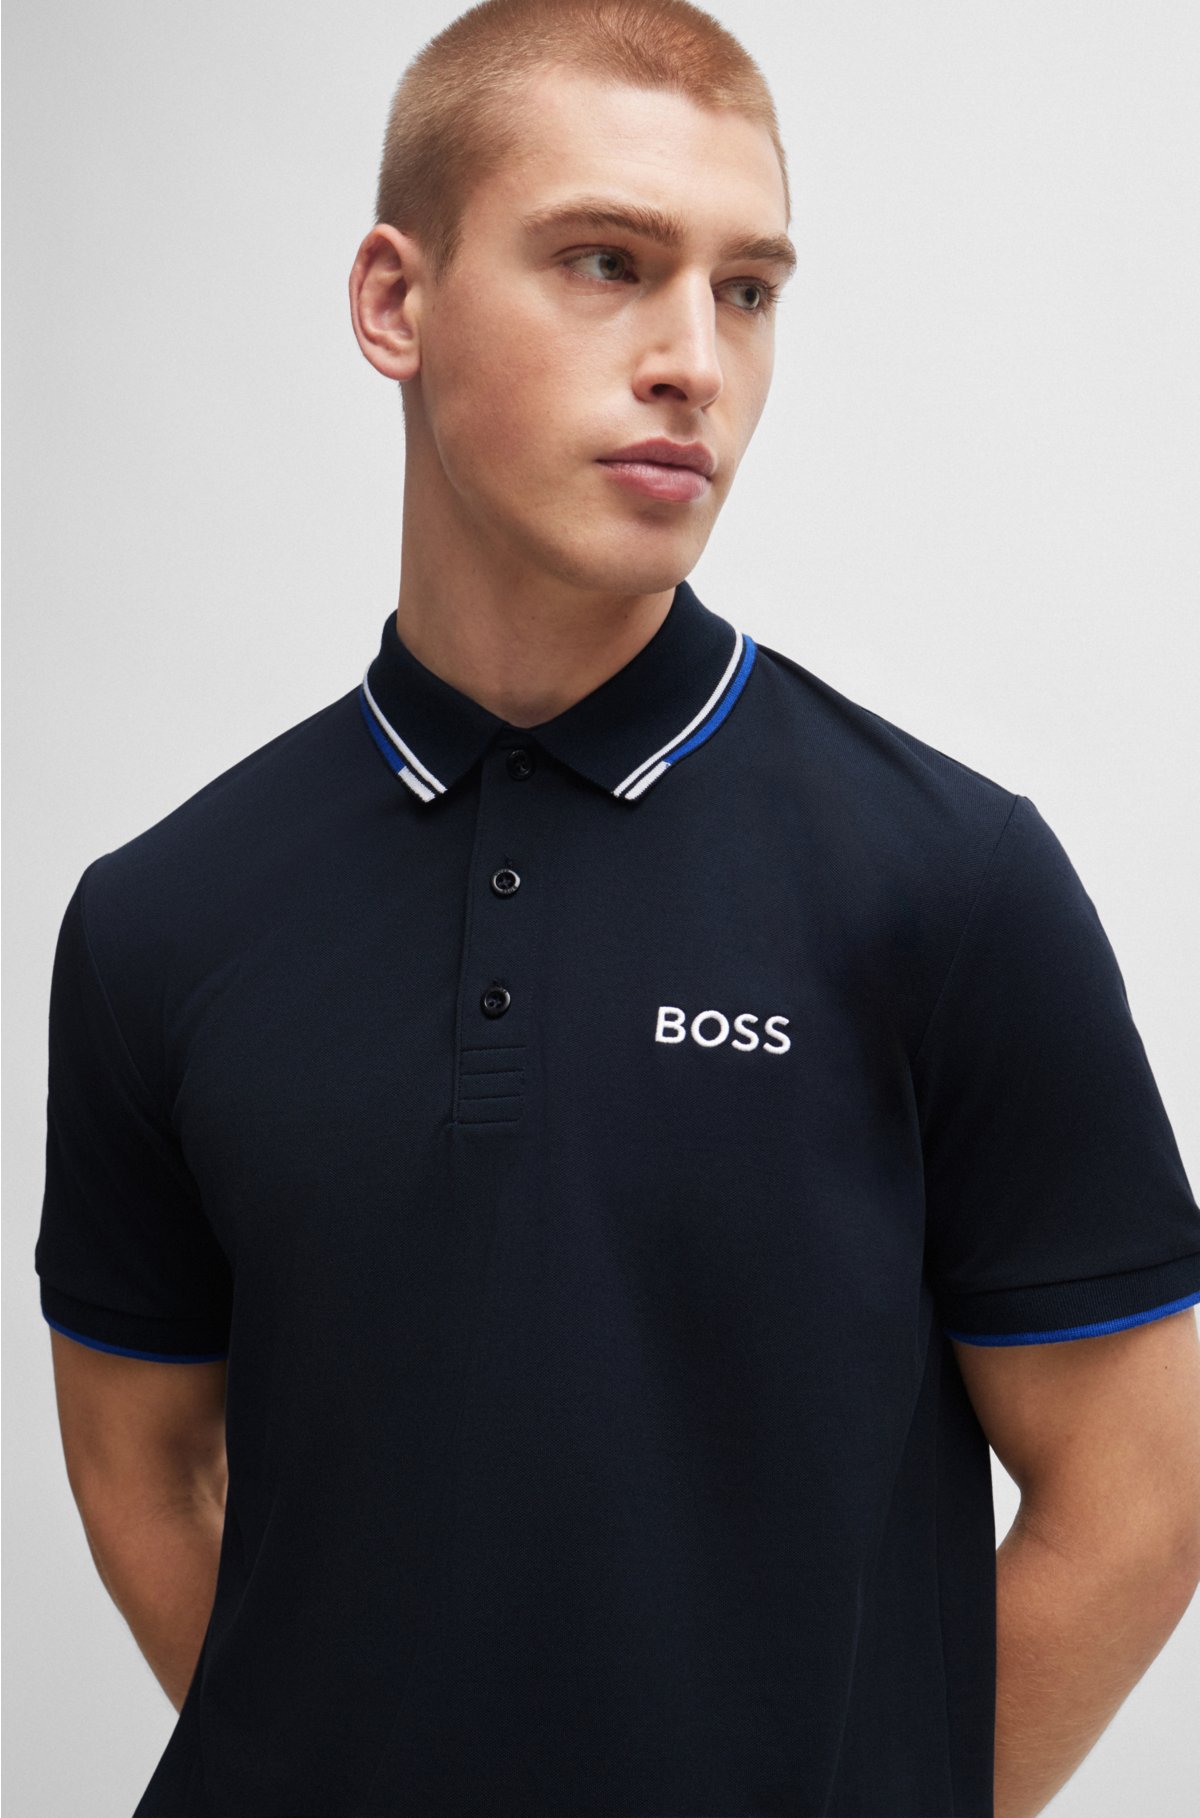 - contrast BOSS with shirt Polo logos